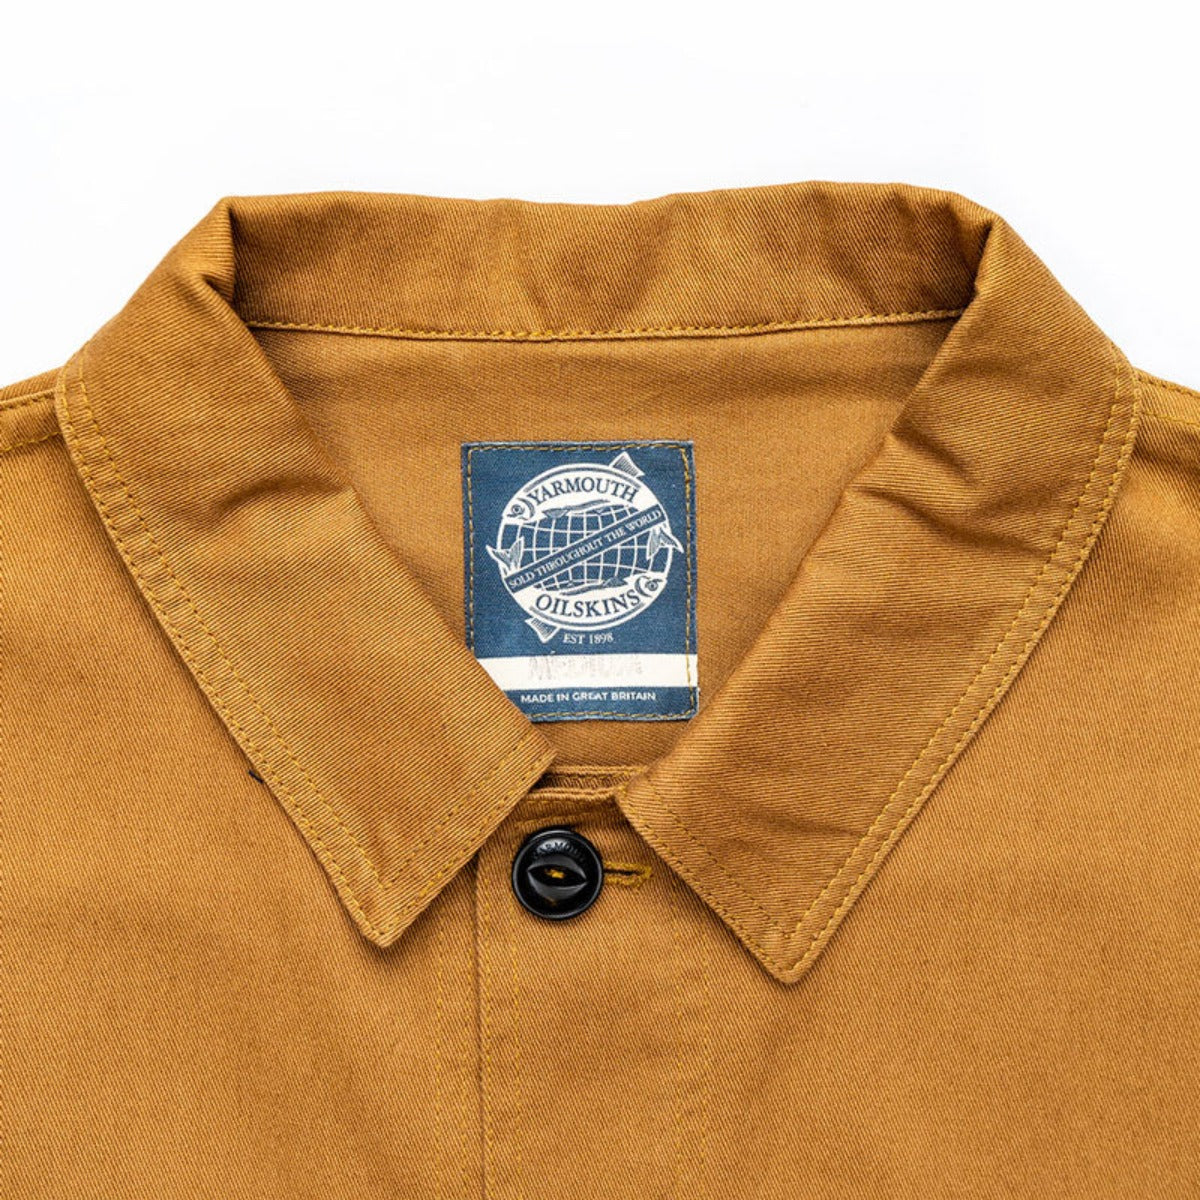 The Drivers Jacket from Yarmouth Oilskin is a short style jacket. A classic garment from times past. Originally popular in the 30's worn by Bus drivers in a very similar style and design. This particular jacket includes a shirt style collar